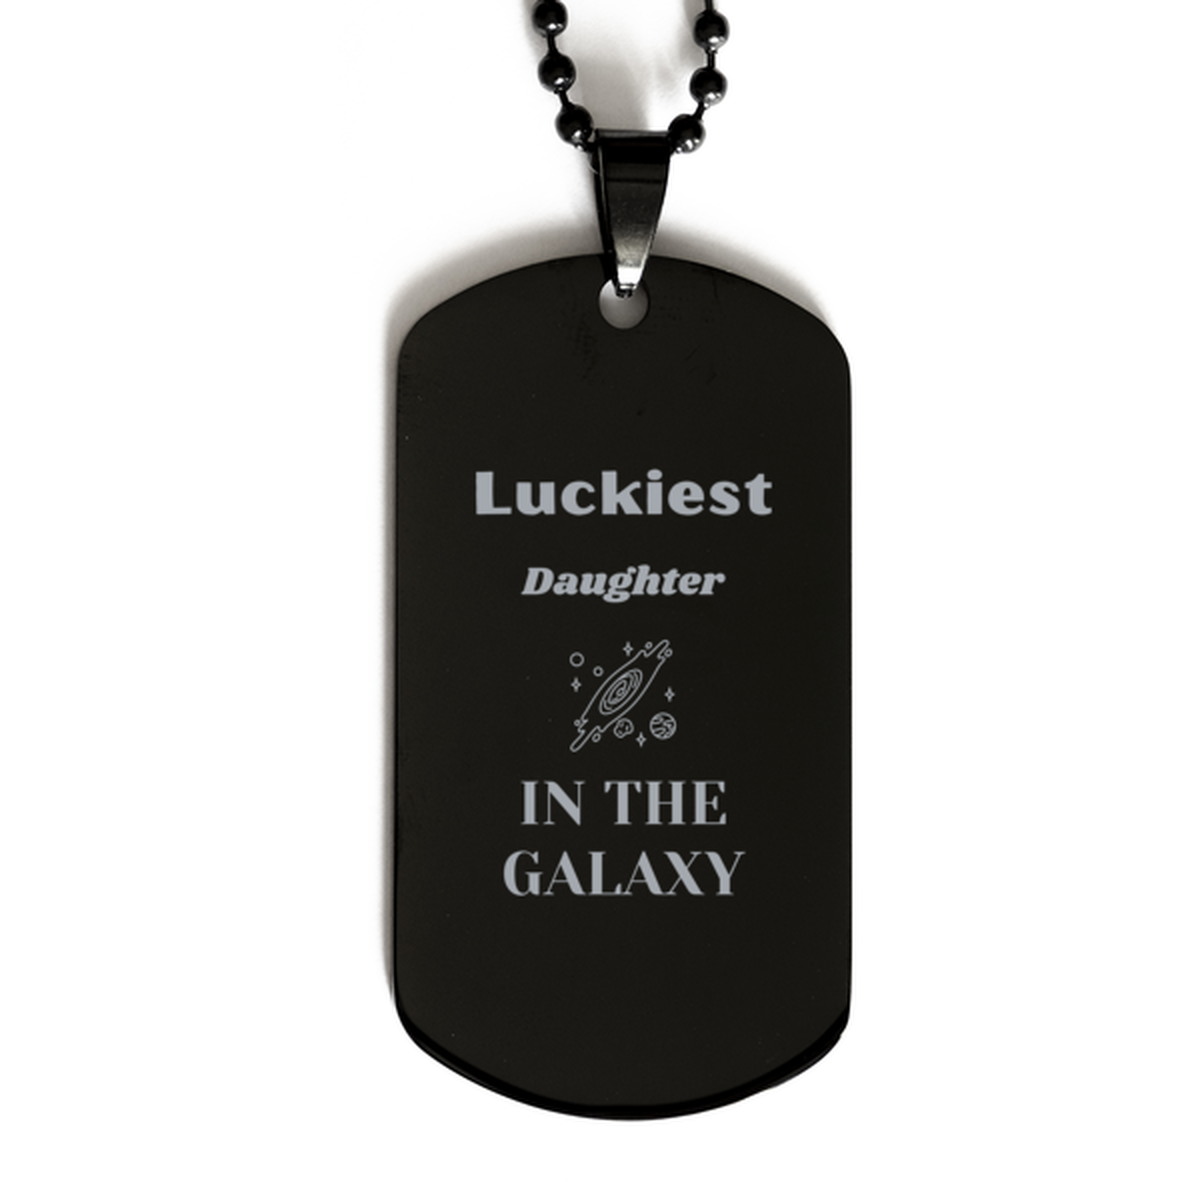 Luckiest Daughter in the Galaxy, To My Daughter Engraved Gifts, Christmas Daughter Black Dog Tag Gifts, X-mas Birthday Unique Gifts For Daughter Men Women